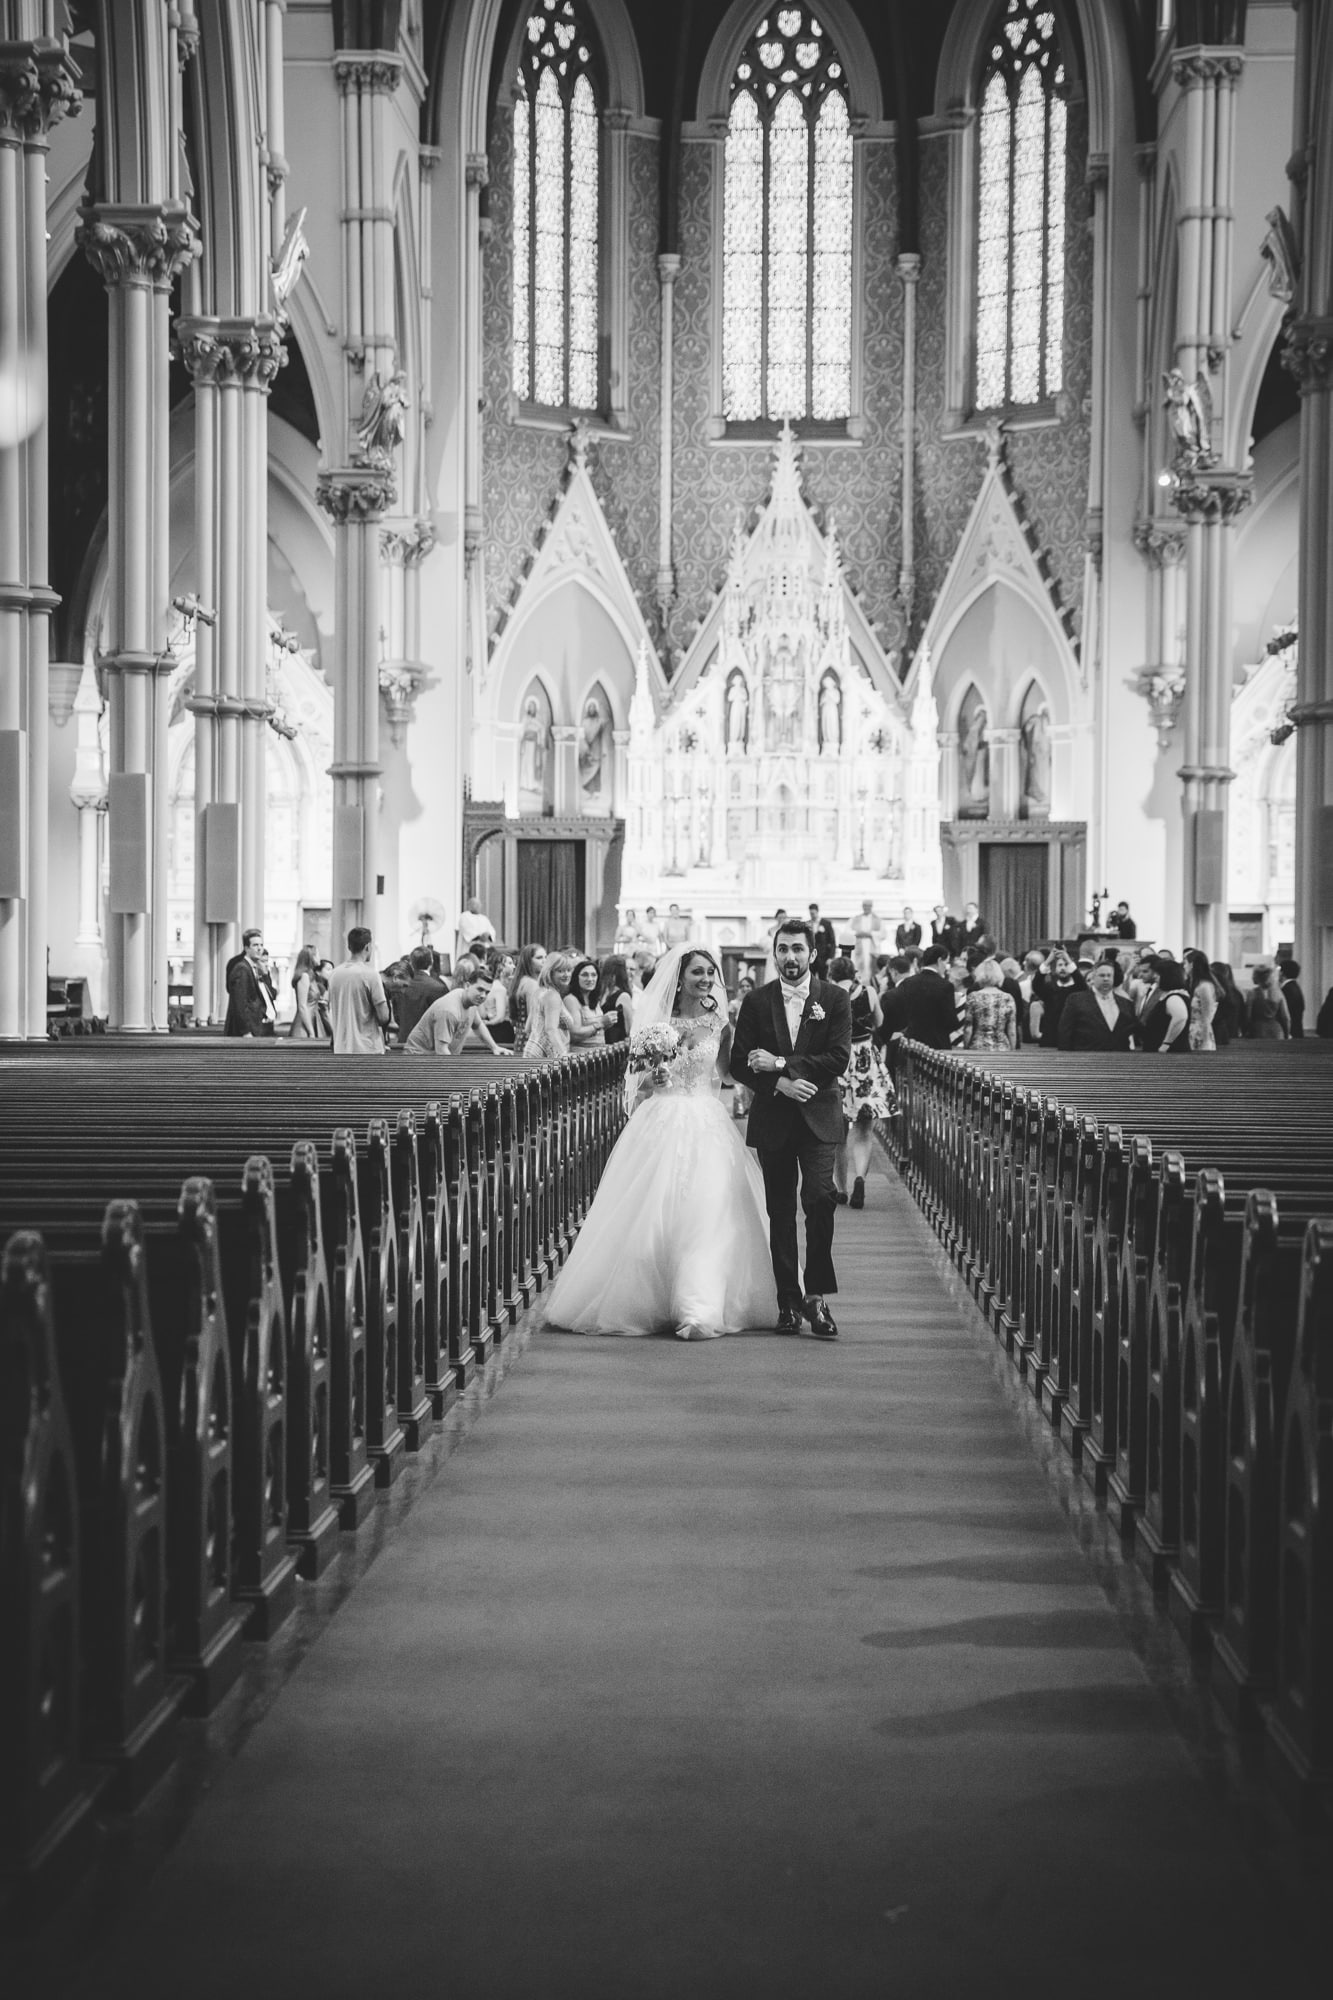 A documentary photograph of couple walking down the aisle of the Cathedral of the Holy Cross after their wedding ceremony